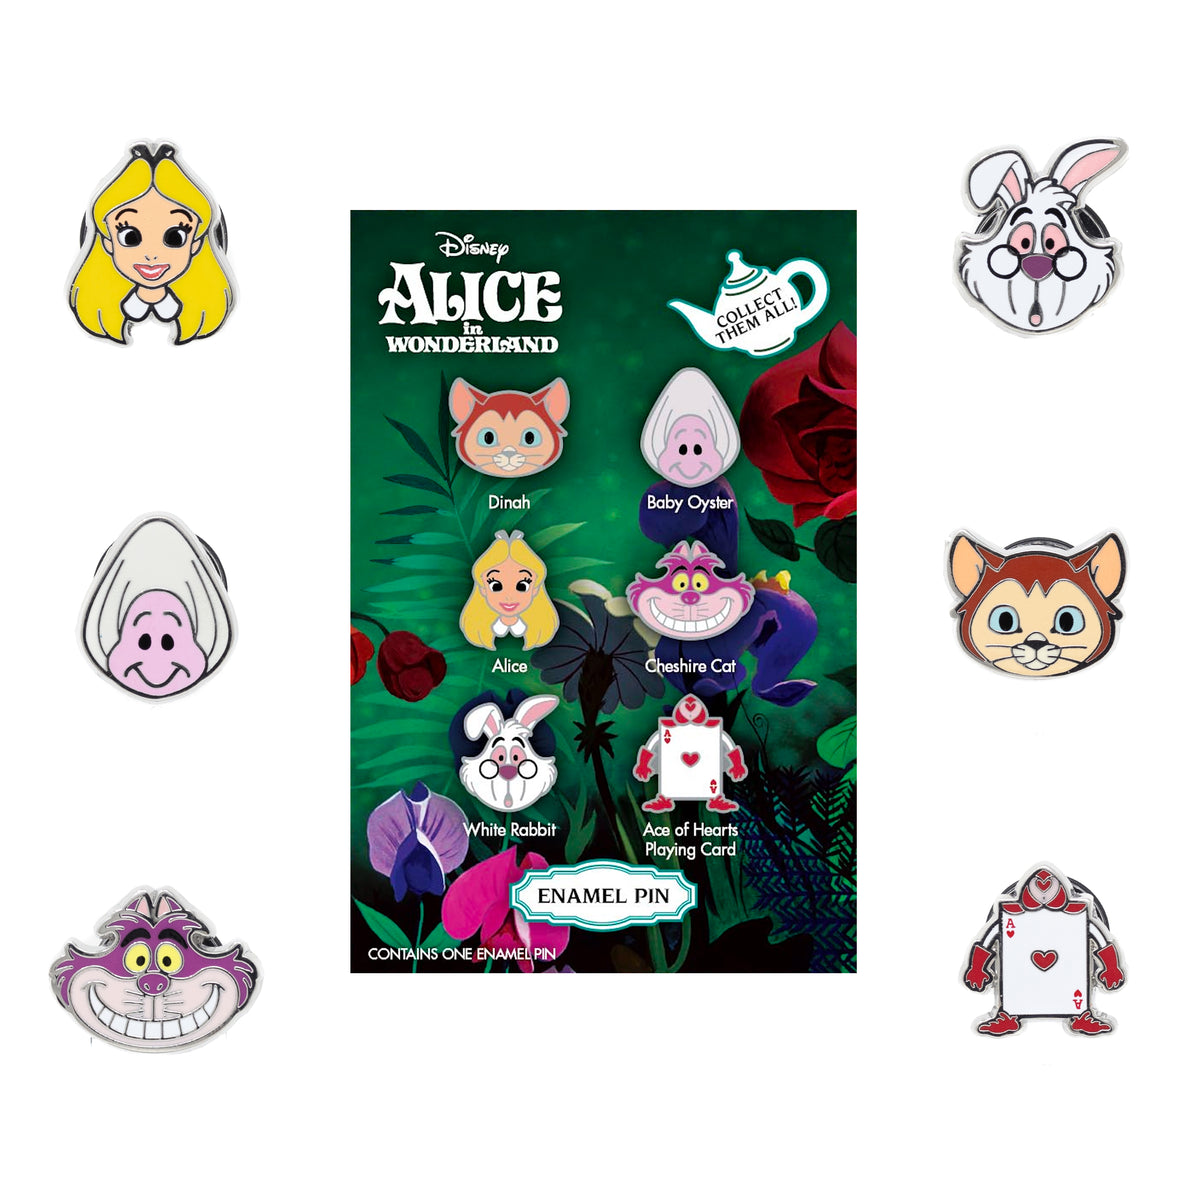 Disney Mini Micro Mystery - Alice in Wonderland Limited Edition 300 - NEW RELEASE